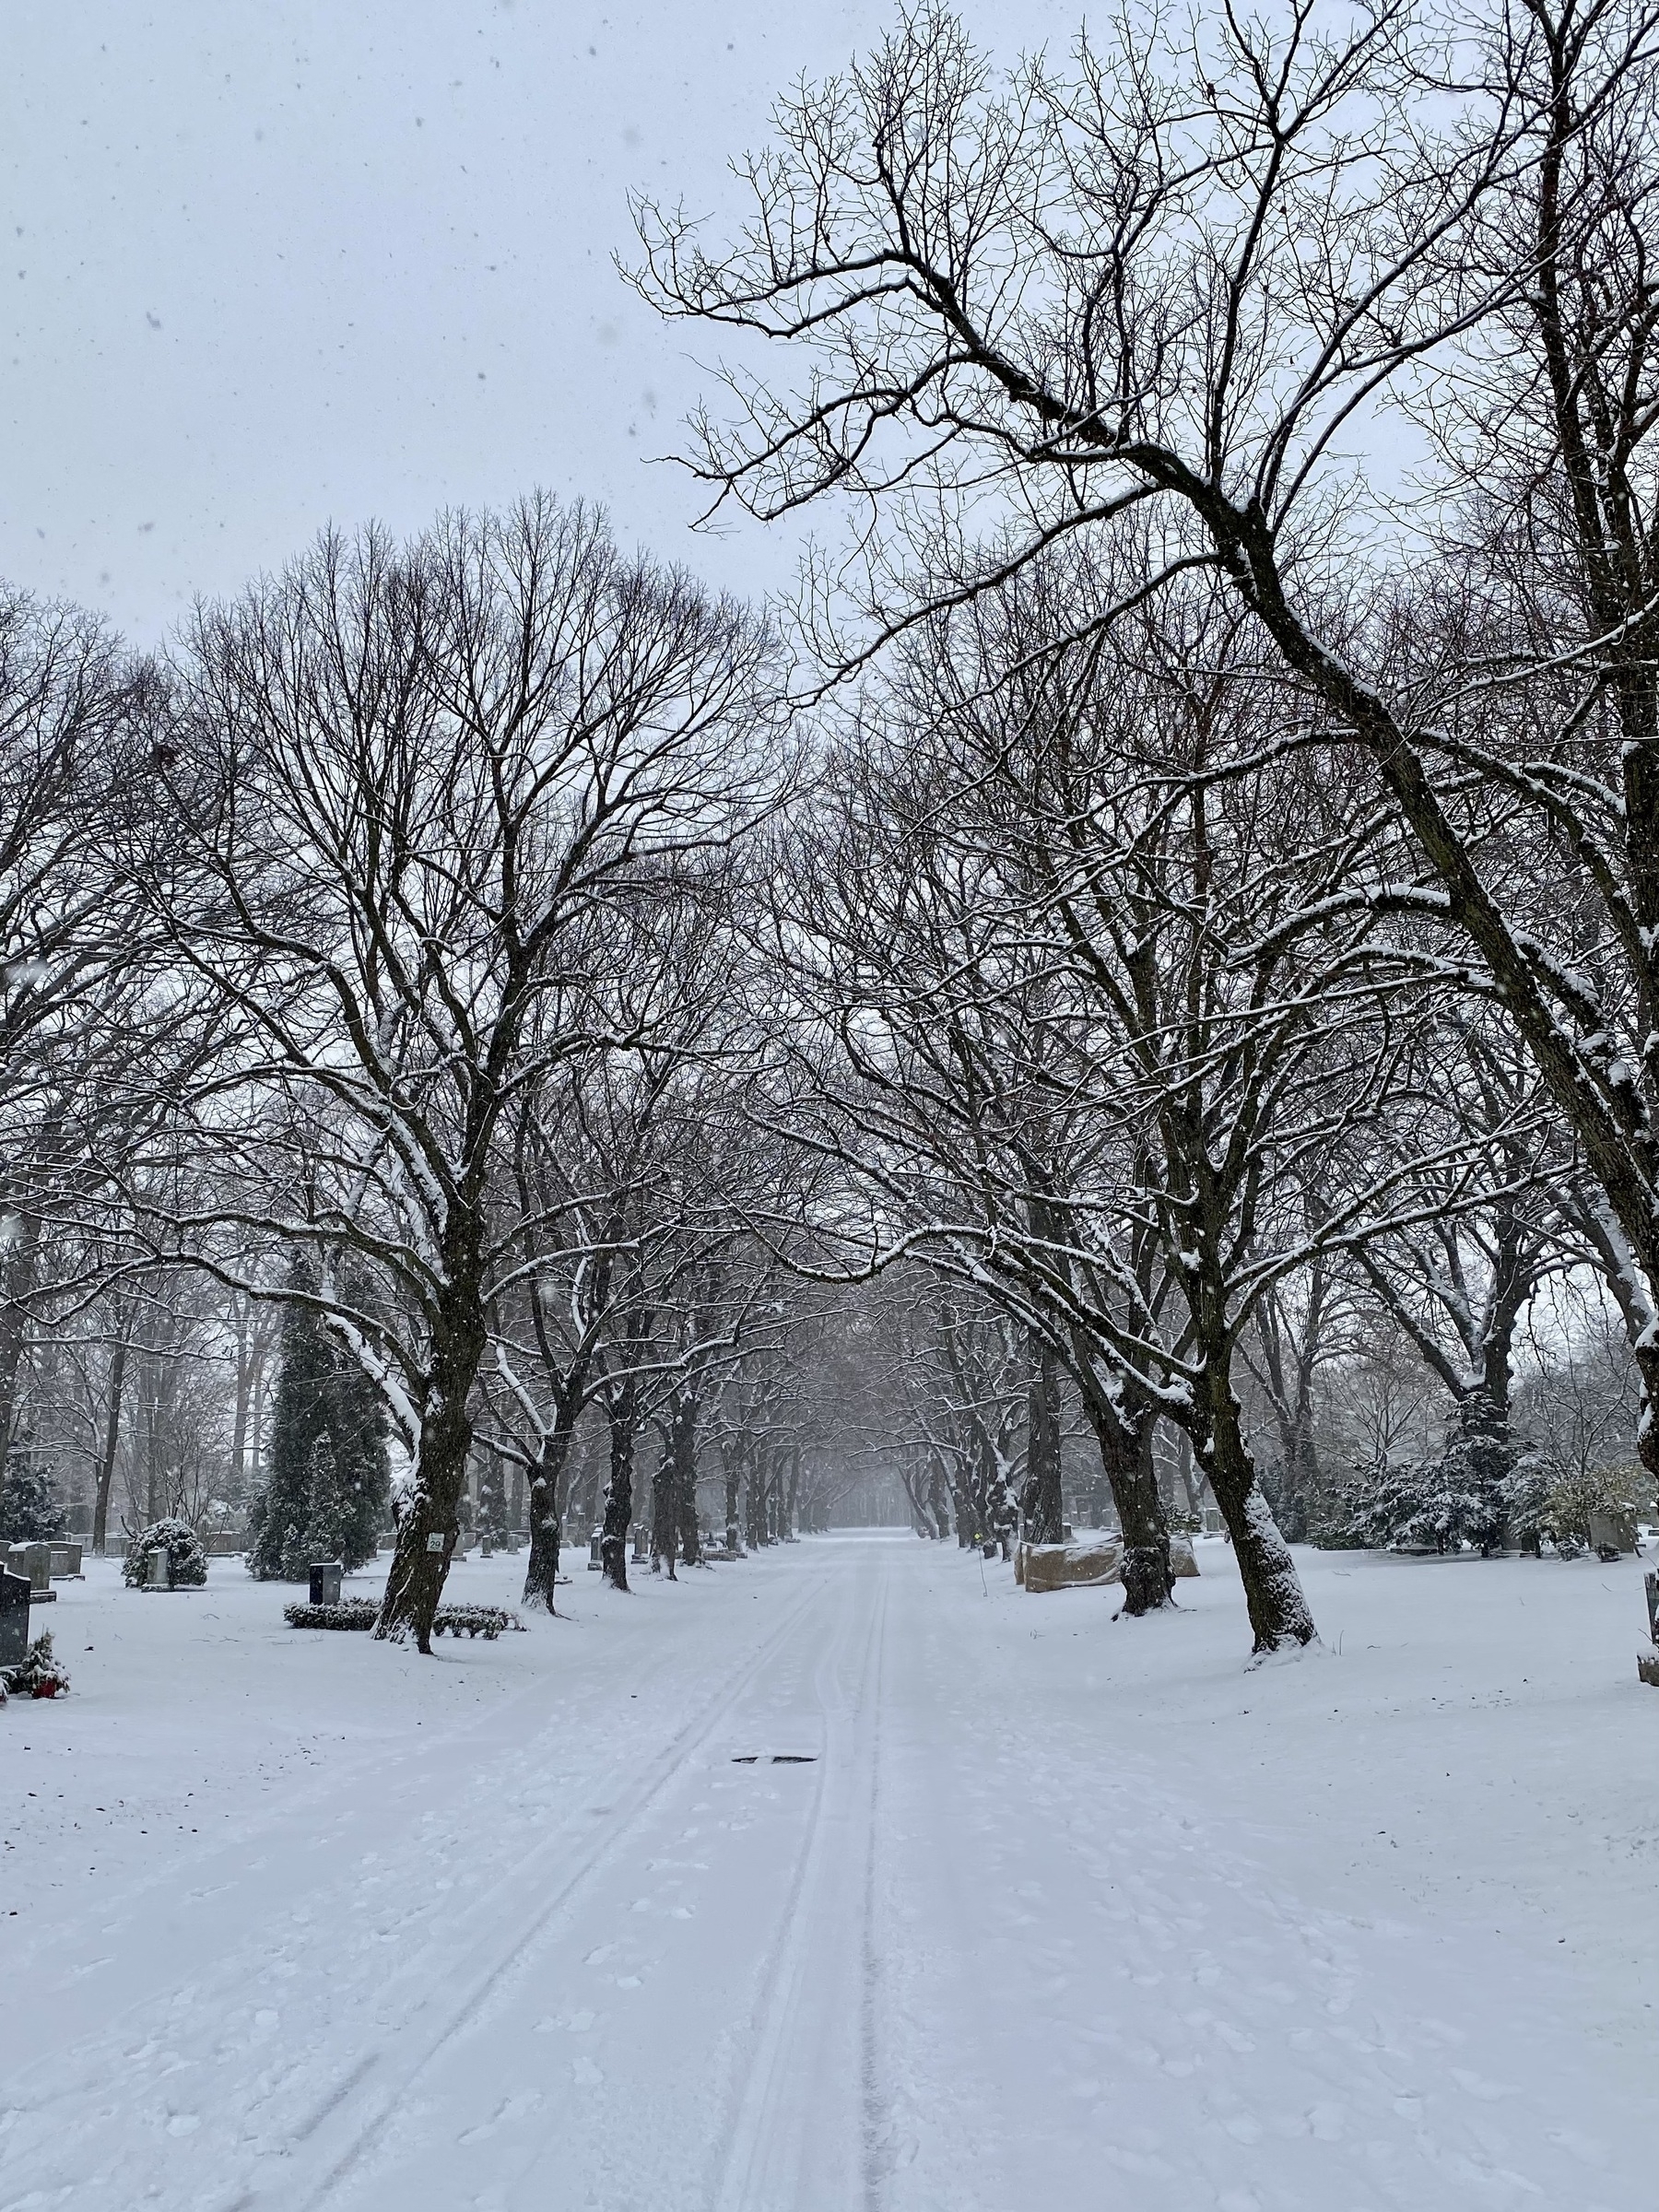 Pathway through a cemetery with trees above and snow on the ground